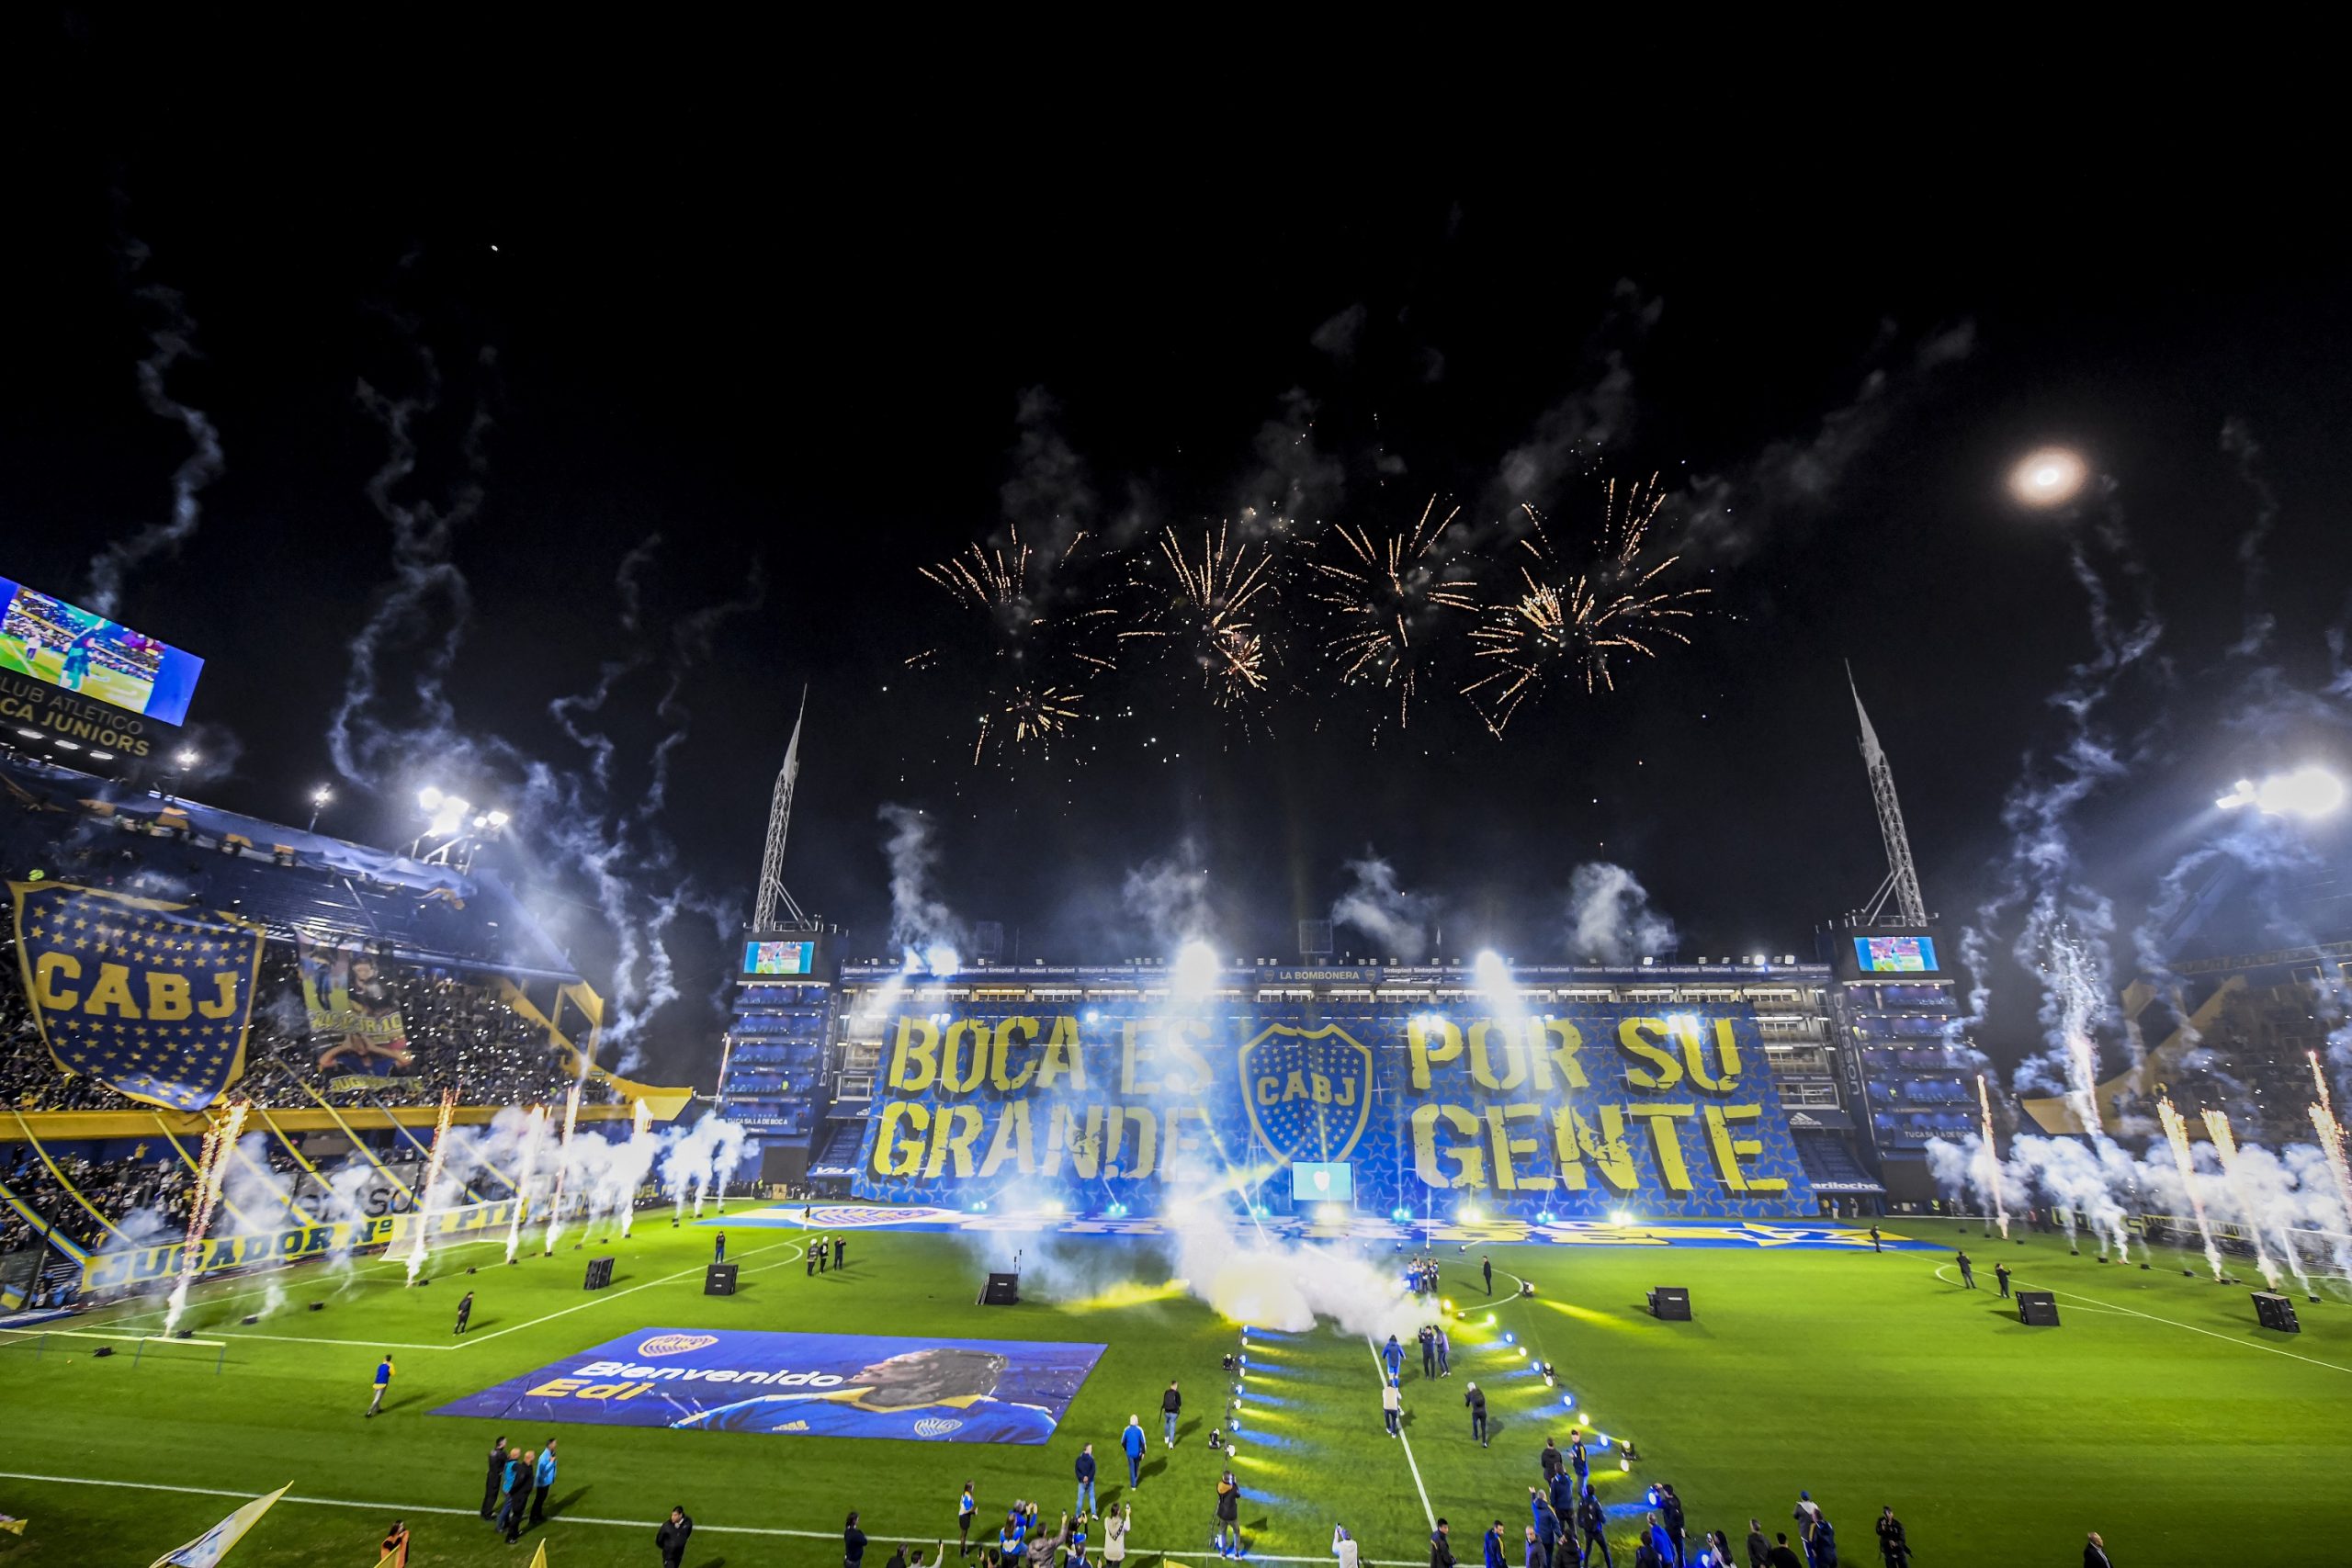 BUENOS AIRES, ARGENTINA - JULY 31: Fans of Boca Juniors cheer for their team during the unveiling of uruguayan striker Edinson Cavani hosted by Boca Juniors at Estadio Alberto J. Armando on July 31, 2023 in Buenos Aires, Argentina. (Photo by Marcelo Endelli/Getty Images)